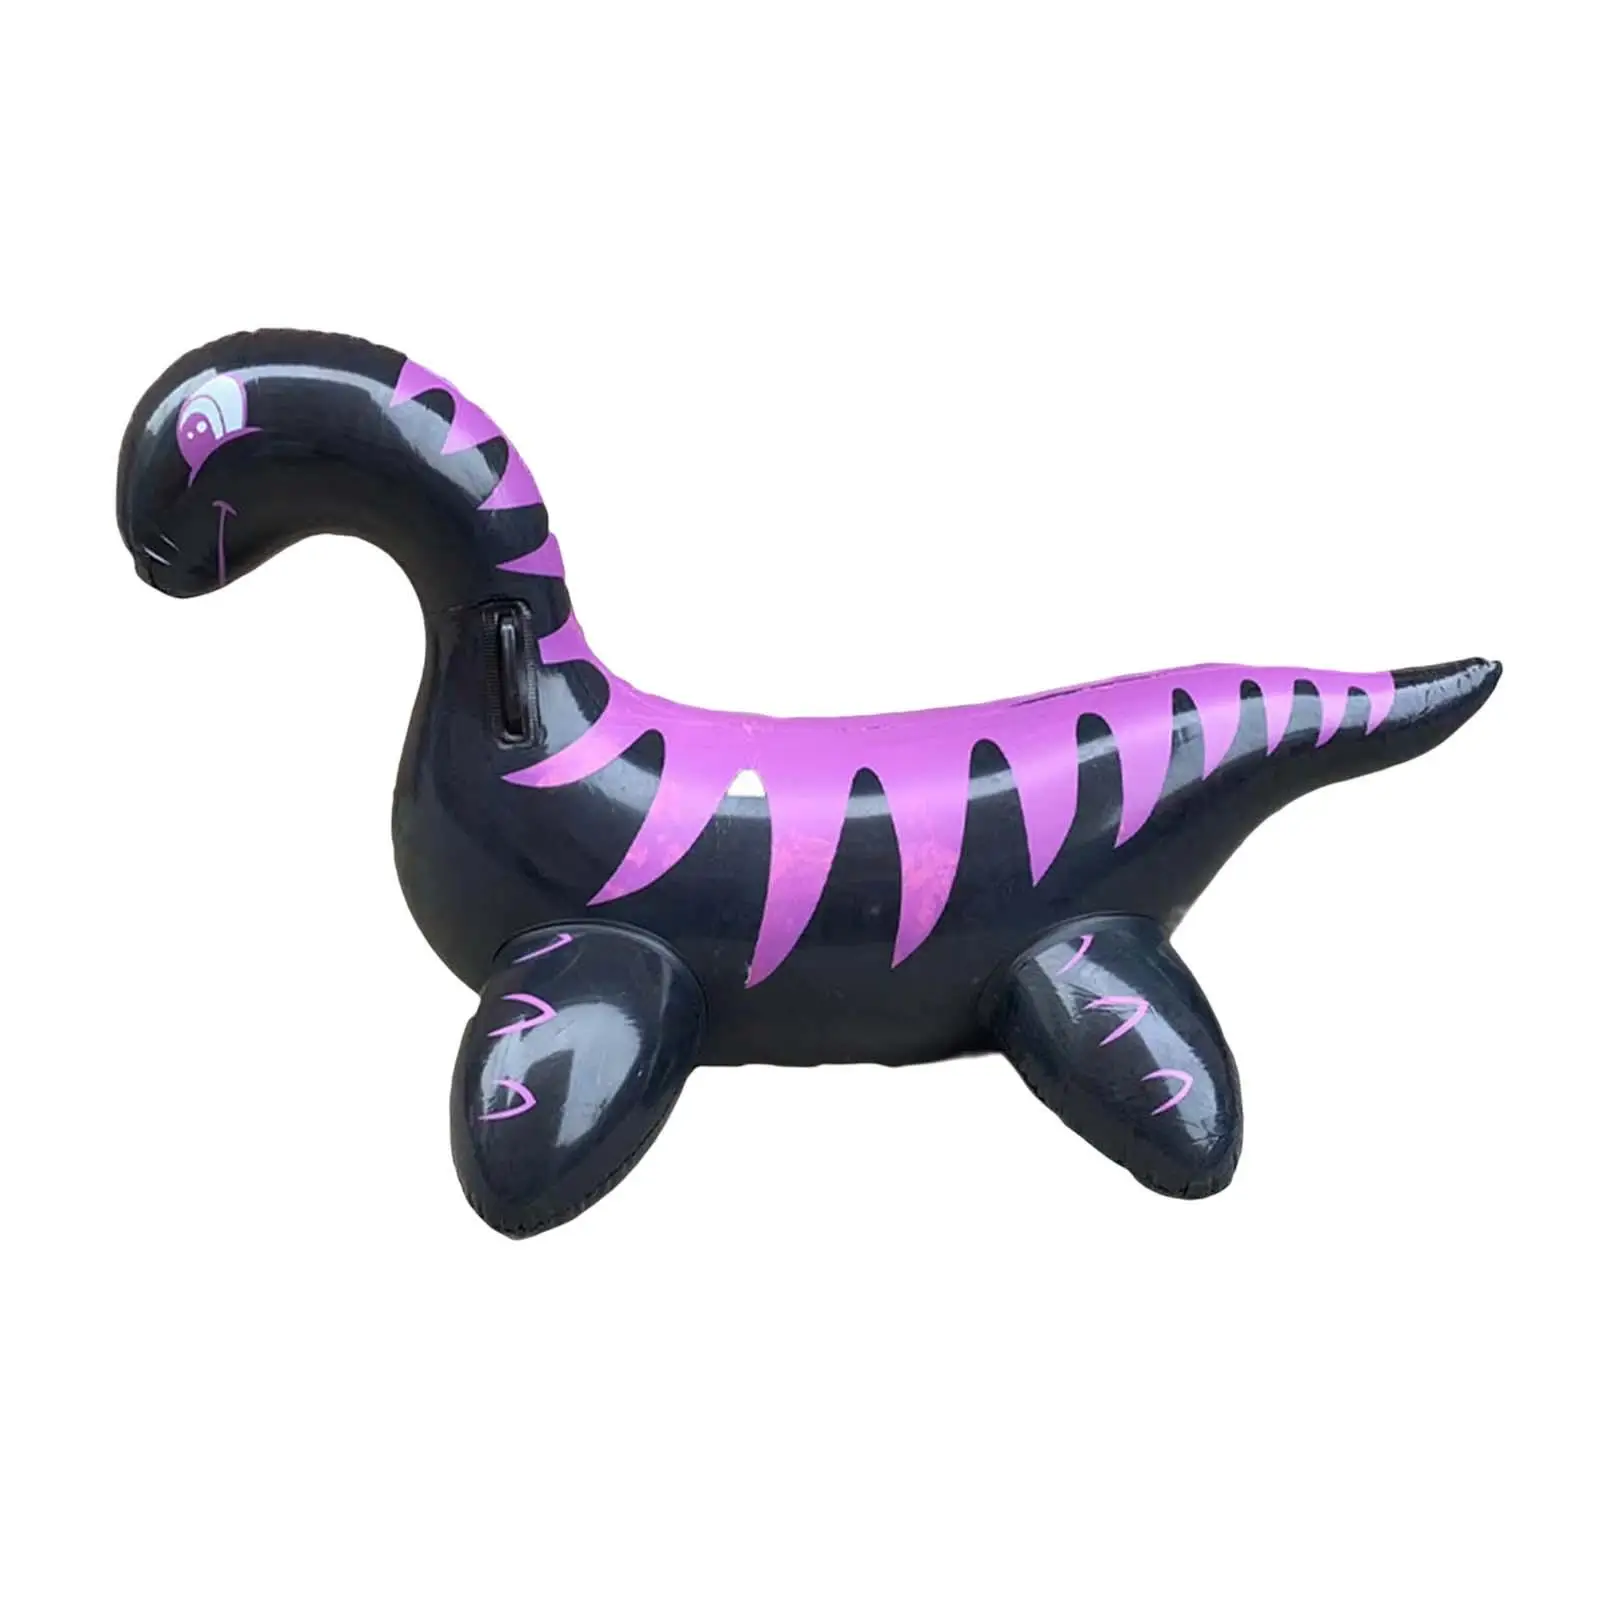 Dinosaur Pool Floats Ride Ons Lounge Toys Summer Water Inflatable Swimming pool floats Pool Toys for Party Gifts Beach Swimming